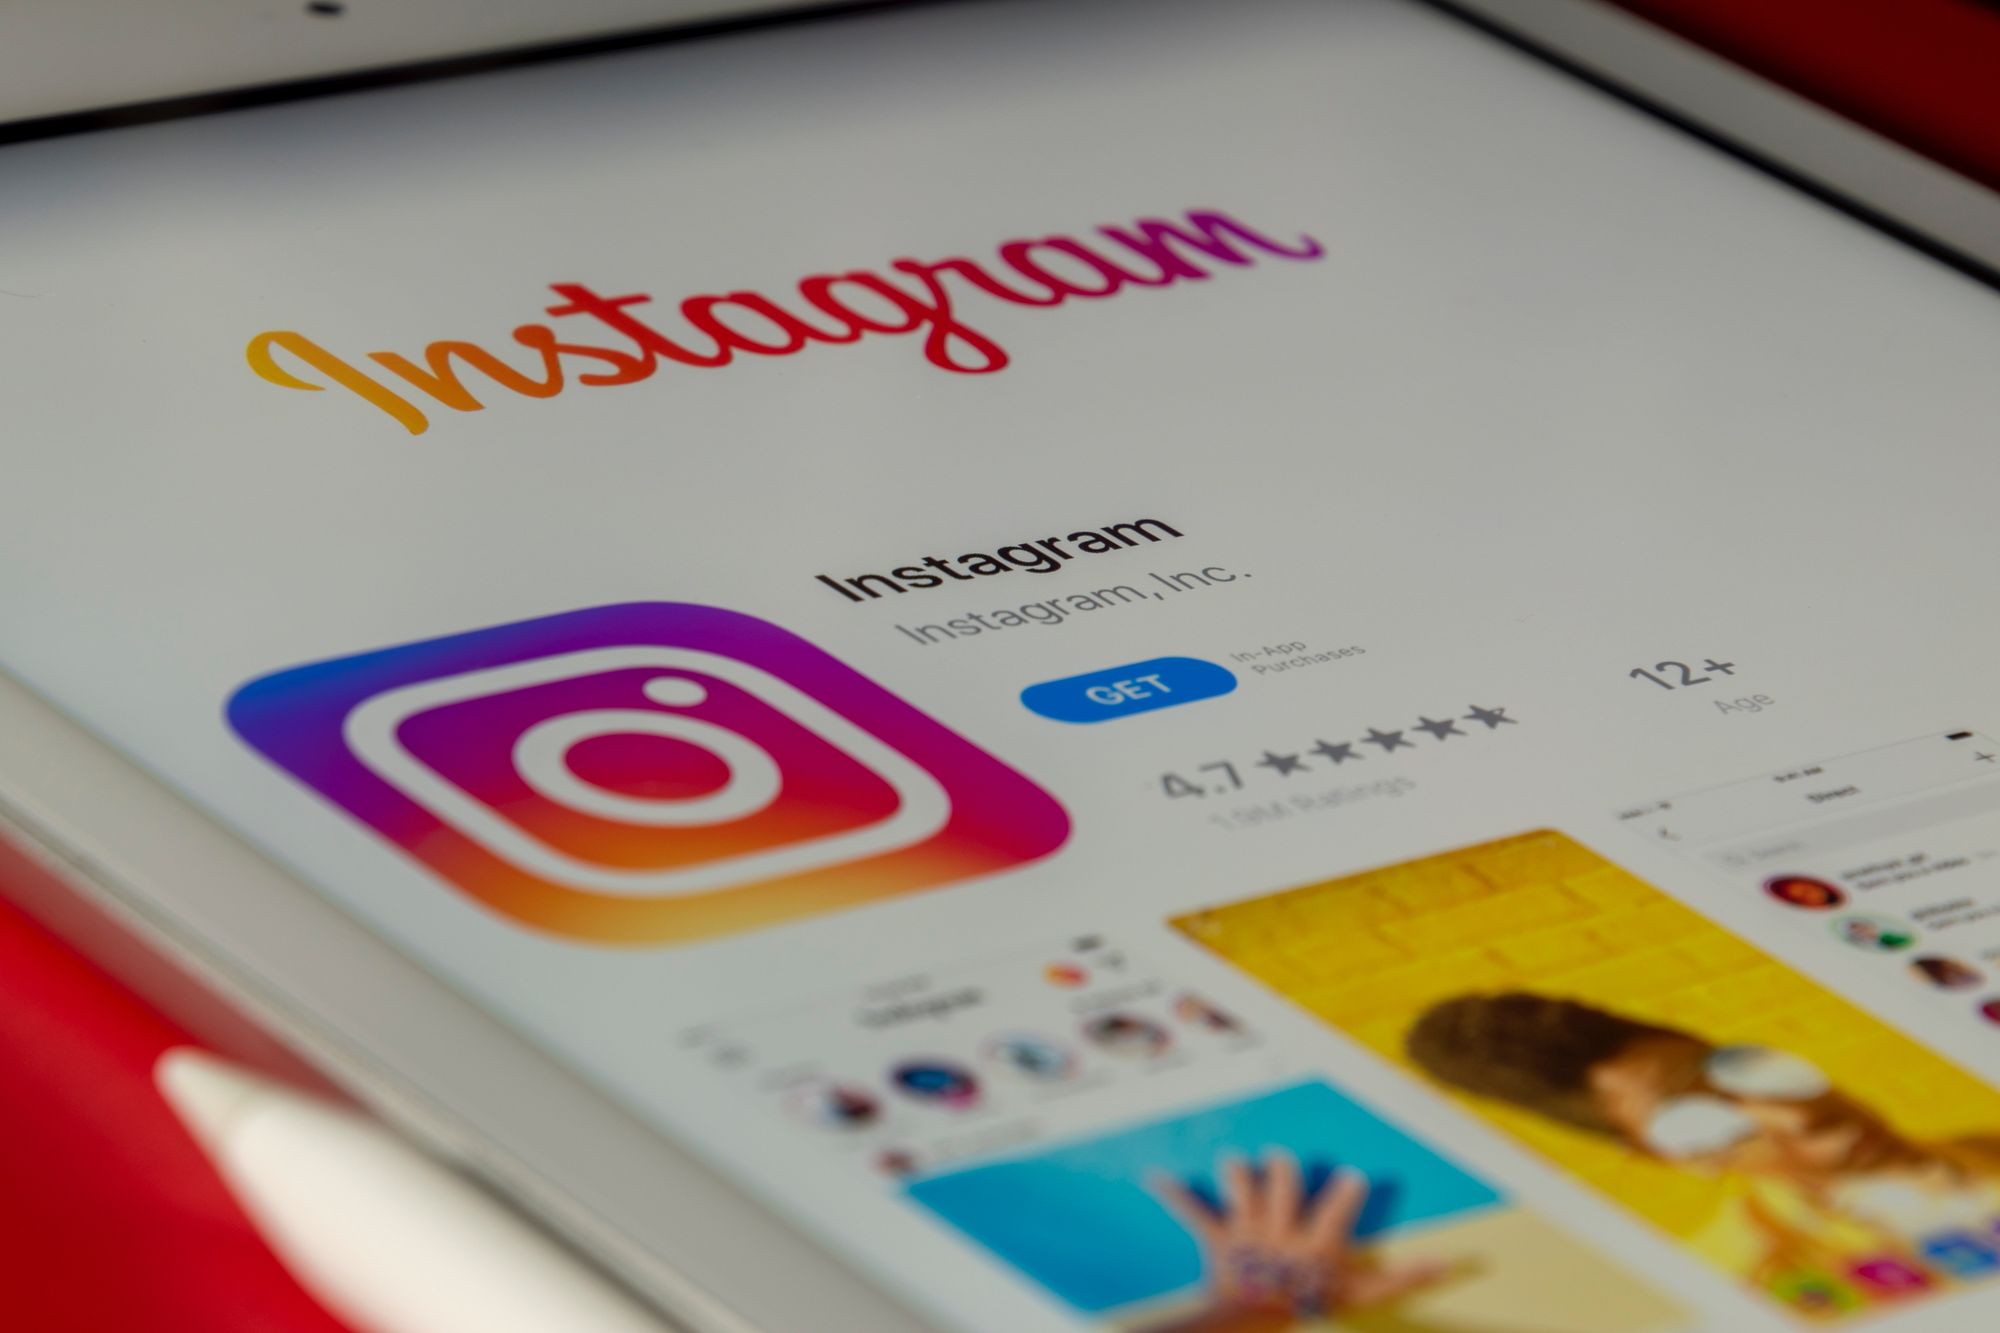 How to increase Instagram engagement: 10 tips to use in 2022